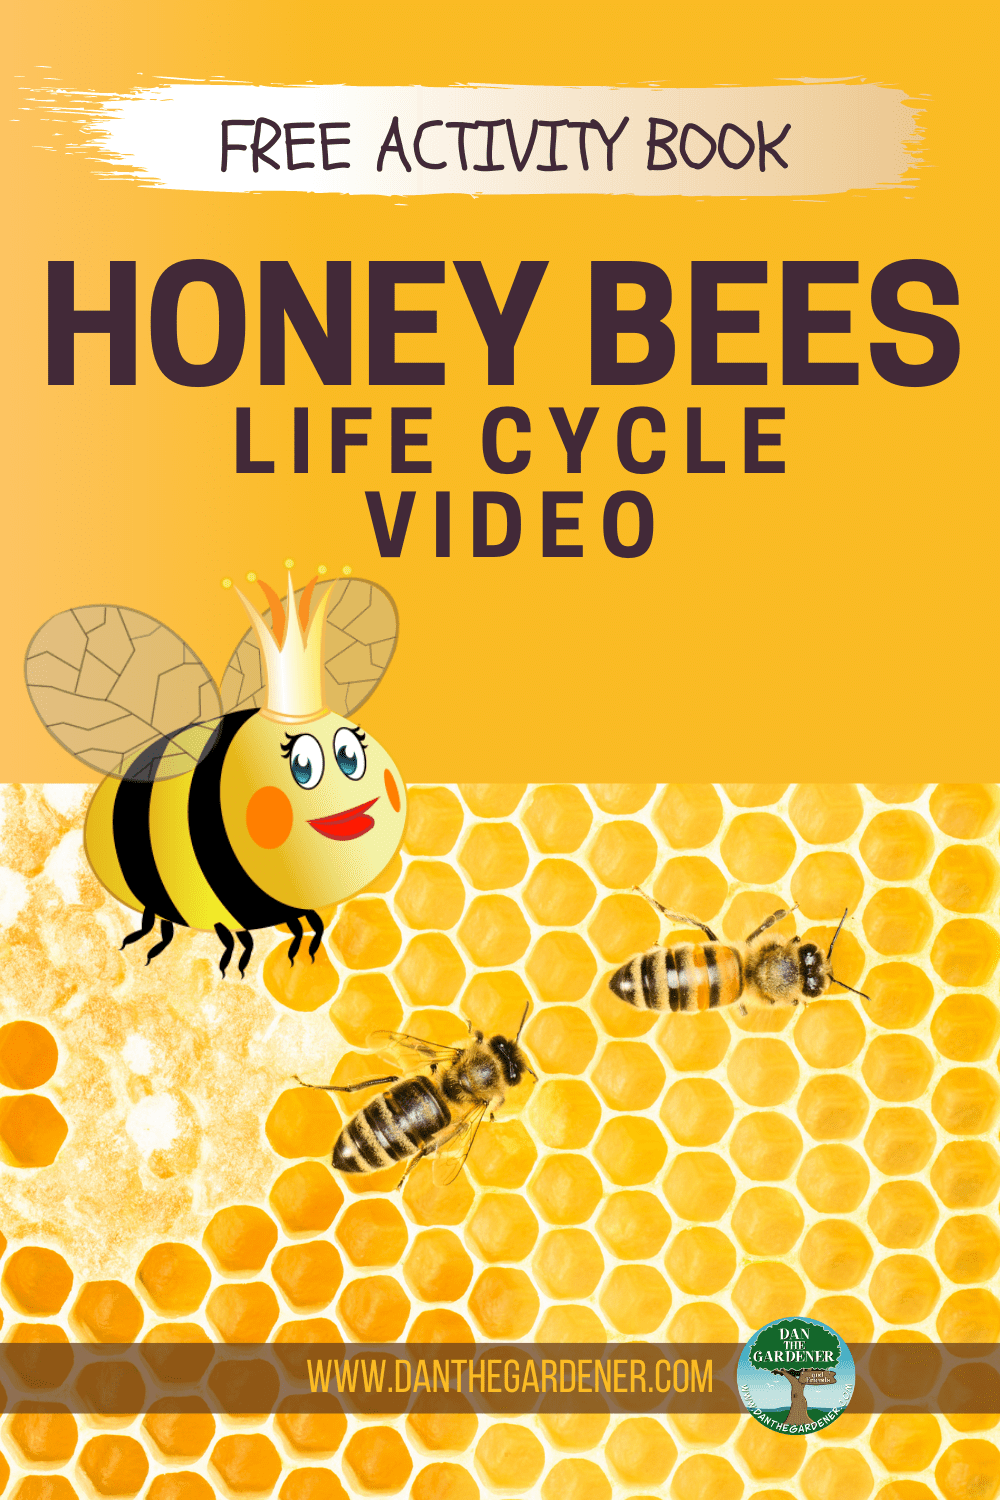 Honey Bees life cycle video